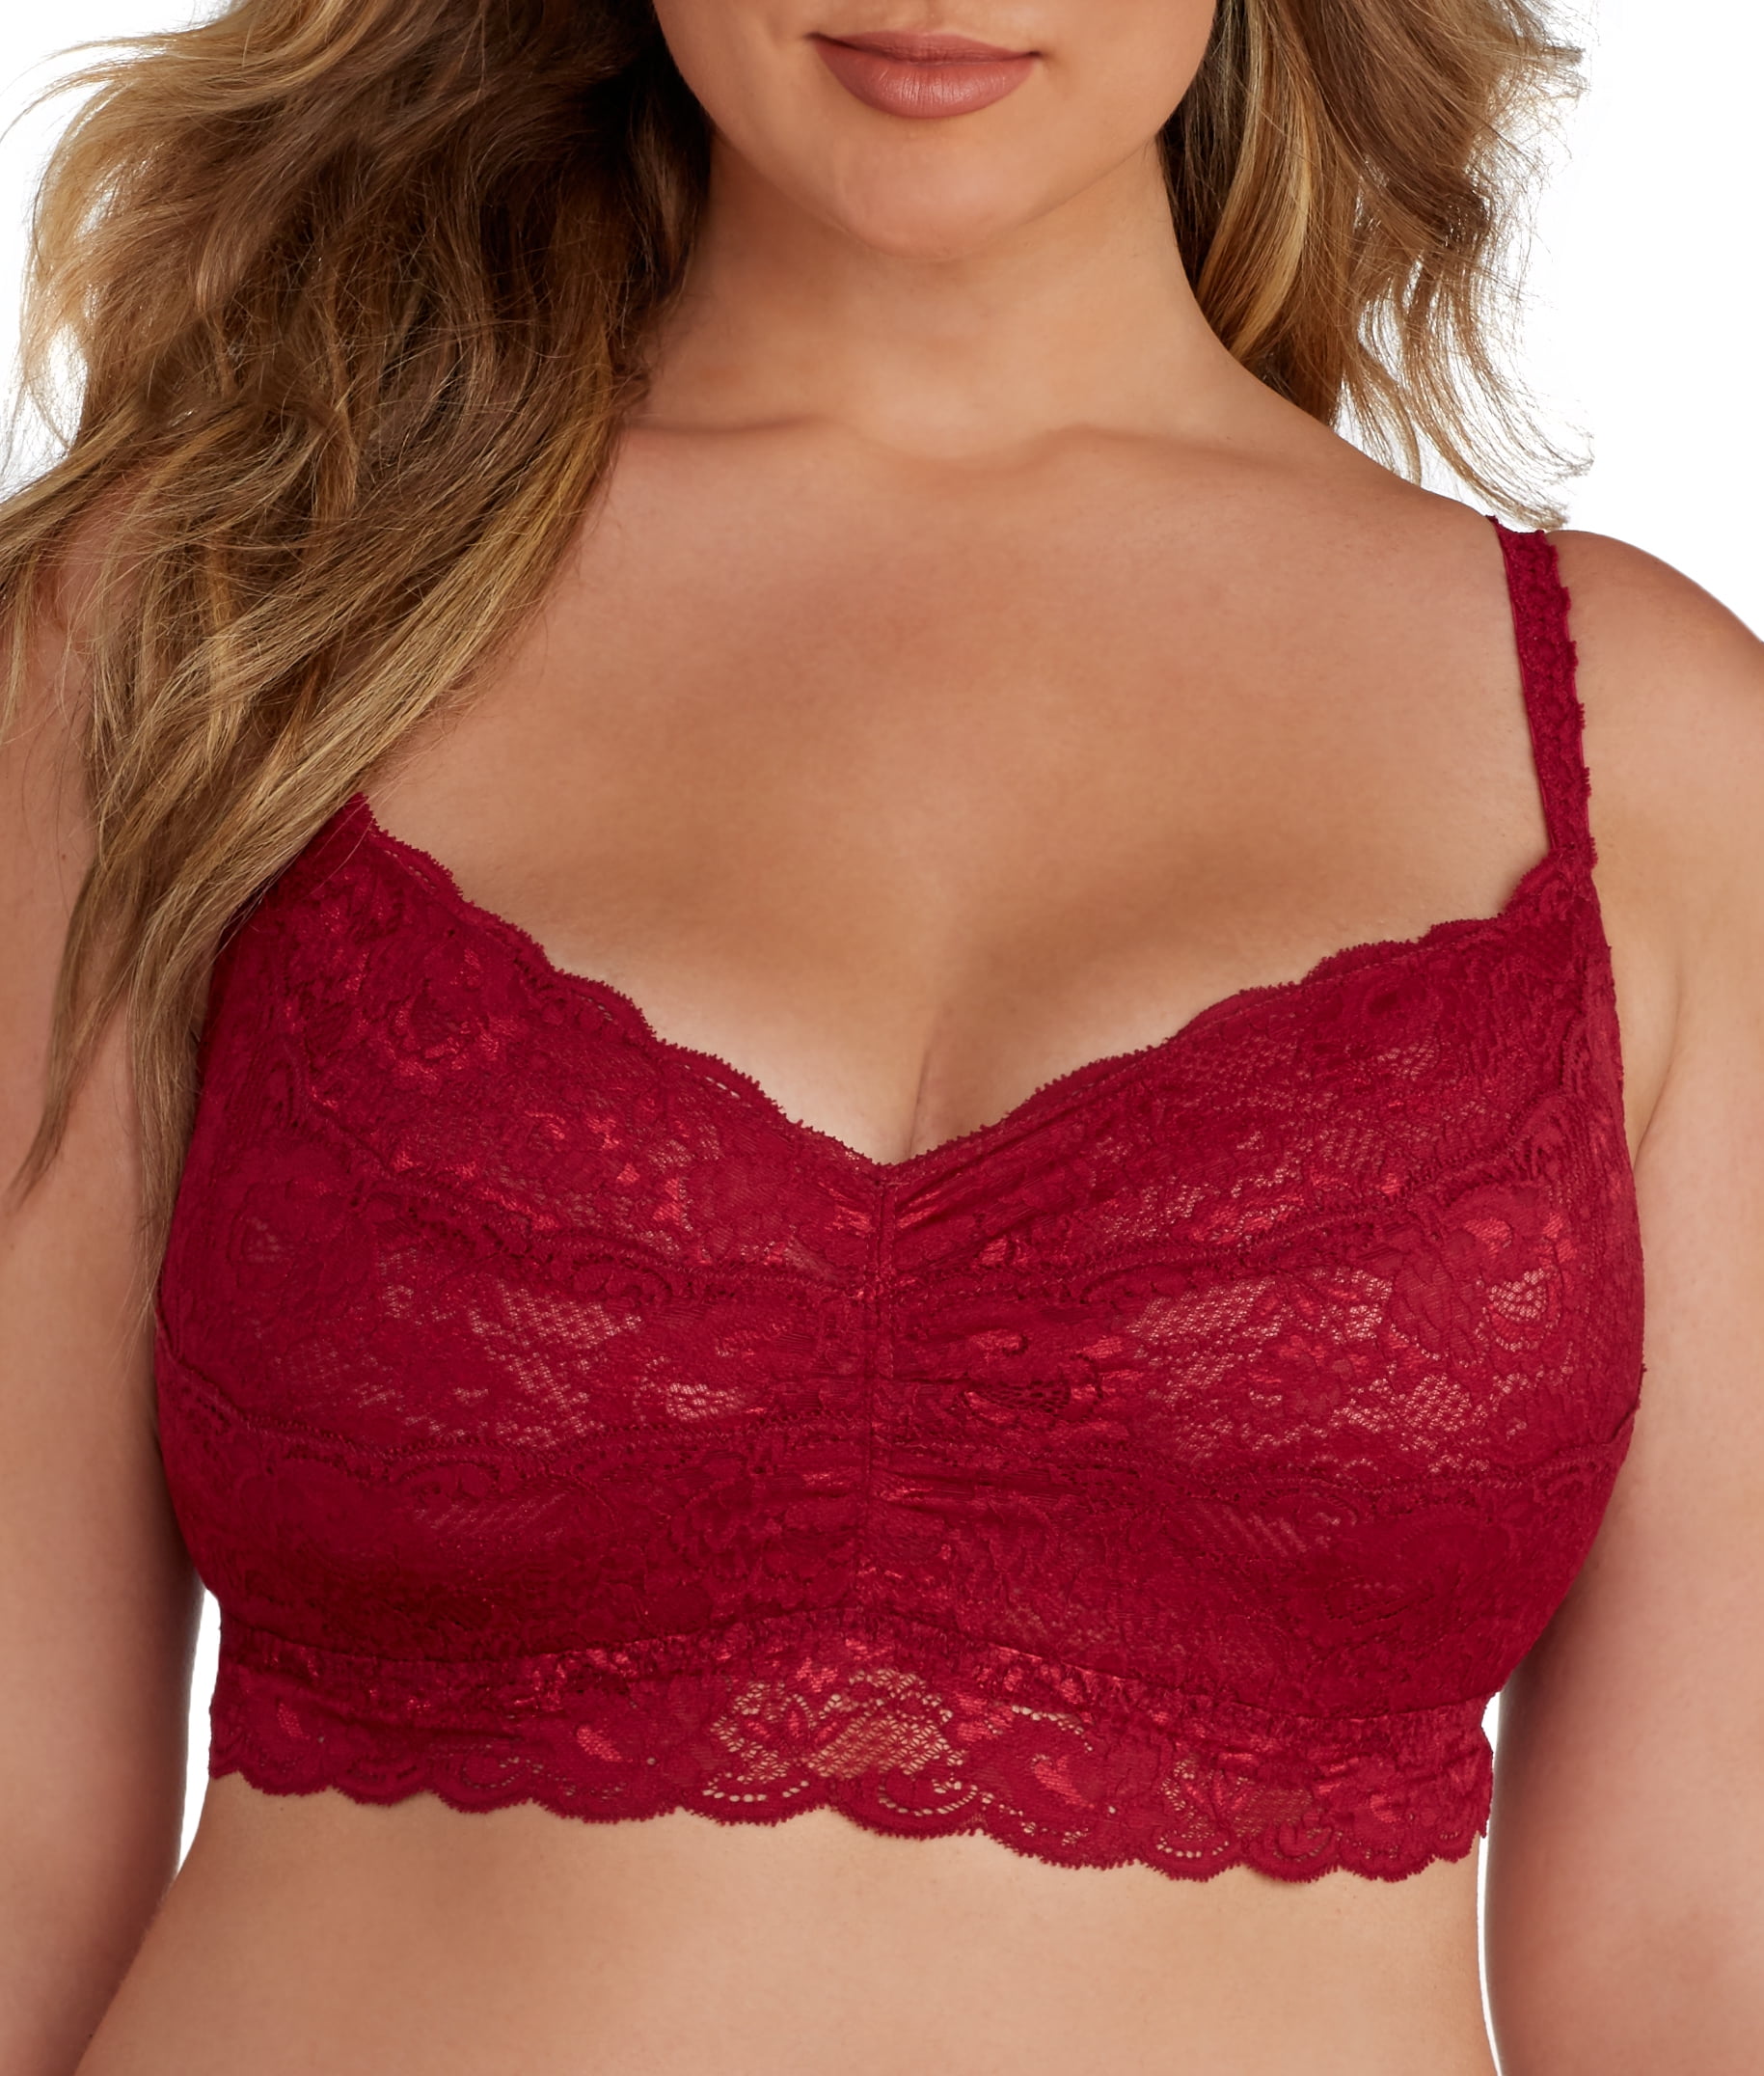 Cosabella Never Say Never Sweetie Plus Soft Bra (NEVER1301P),3X,Mystic Red  